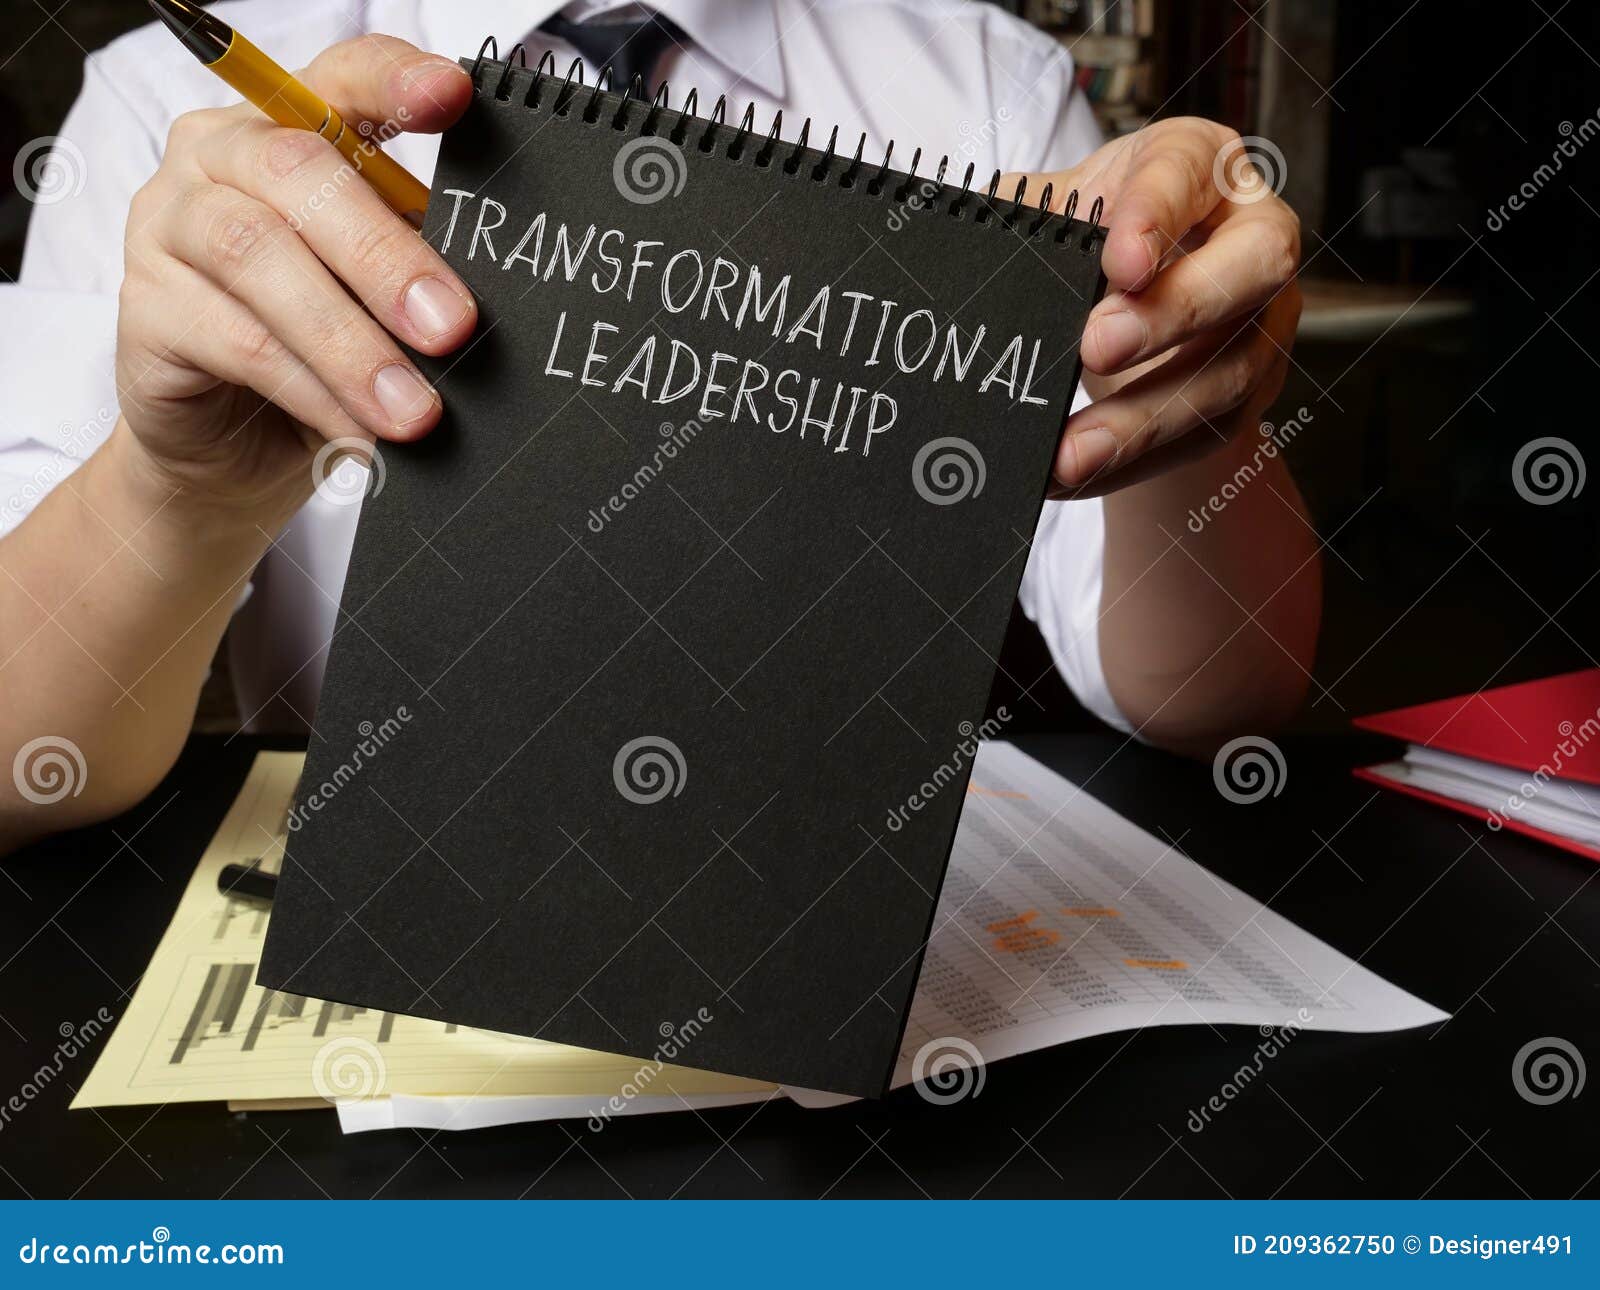 manager holds info about transformational leadership.